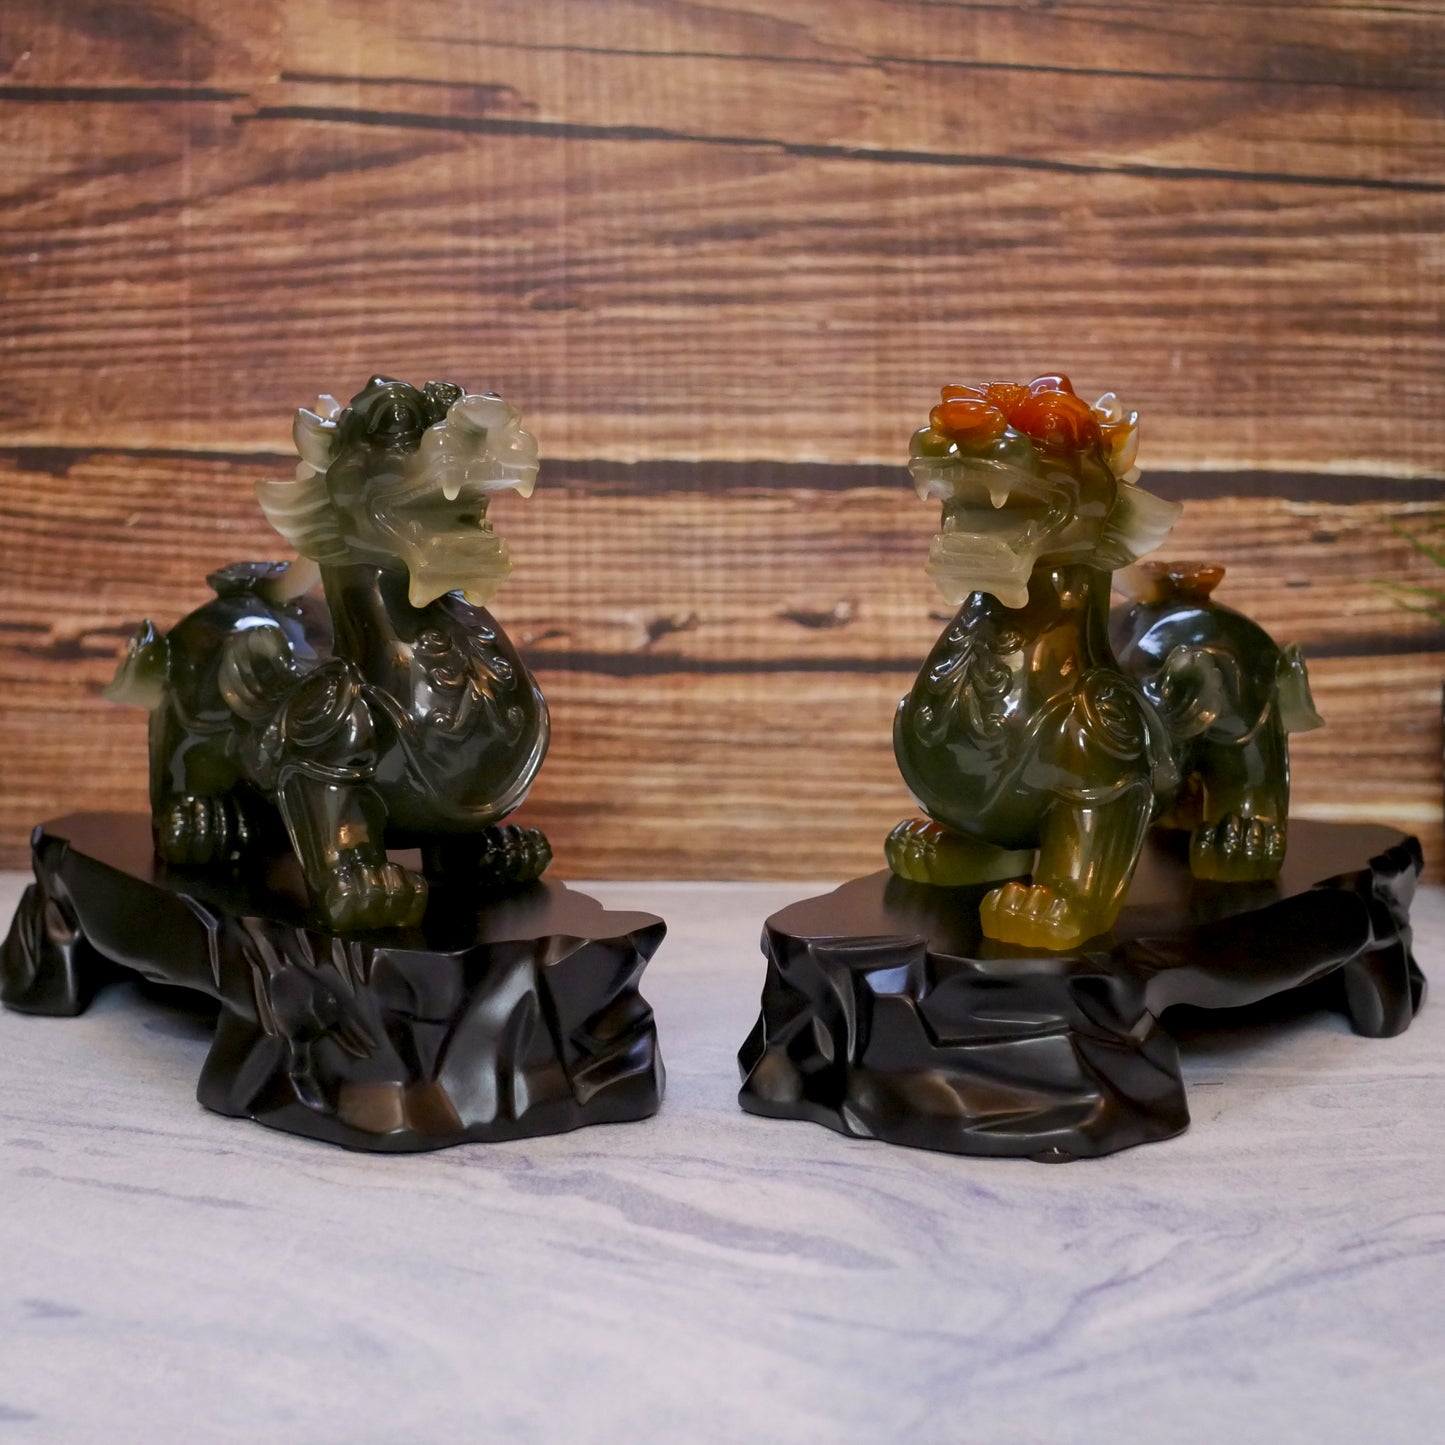 Chinese Feng Shui Pixiu Lion Resin Statue Pair |  Home Decor Blessing Gift 10.5" Long